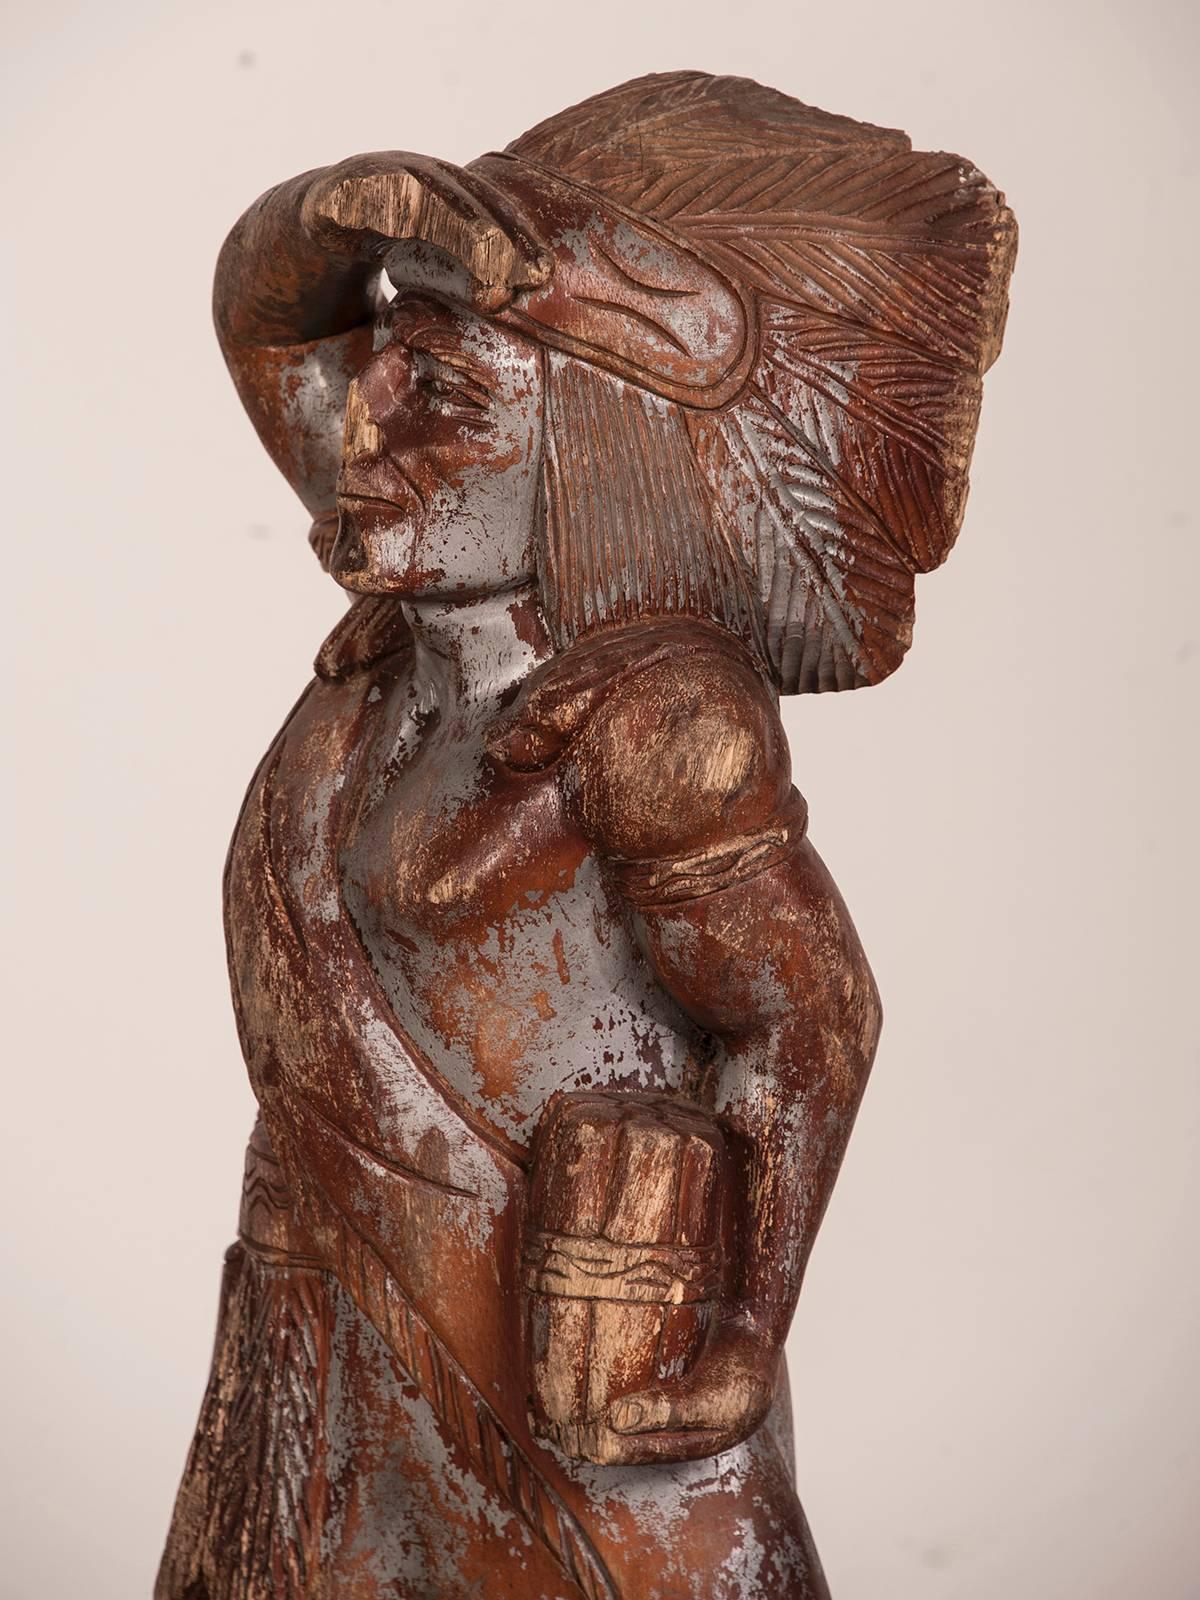 Receive our new selections direct from 1stdibs by email each week. Please click Follow Dealer below and see them first!

A standing figure of an antique American cigar store Indian hand carved from a solid block of timber with traces of the